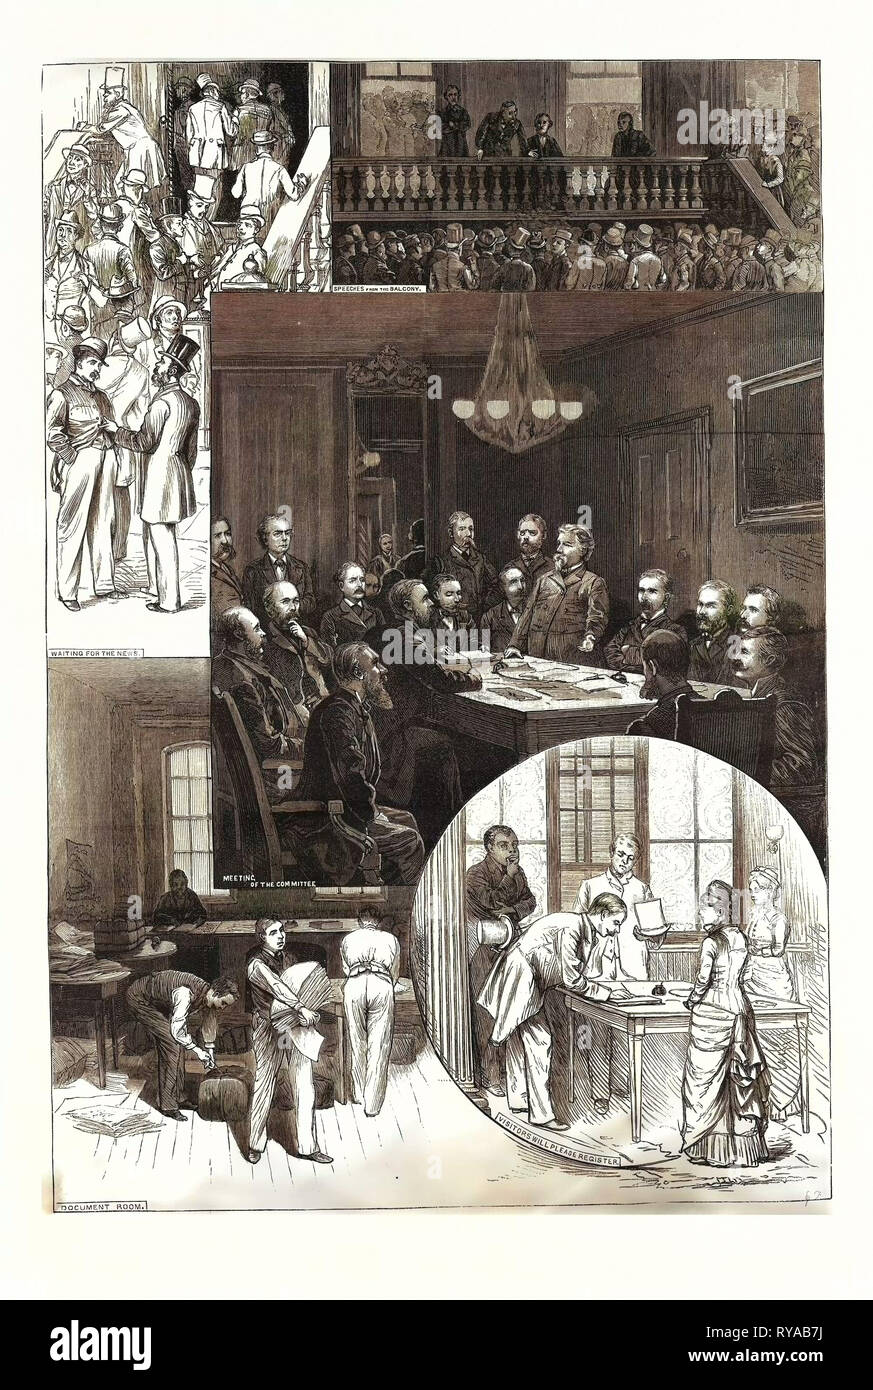 Head-Quarters of the National Republican Committee, Fifth Avenue, New York, Drawn Frank Miller, Politics, Political, Politic, Campaign, Patriotic, US, USA, America, United States, American, Engraving 1880 Stock Photo